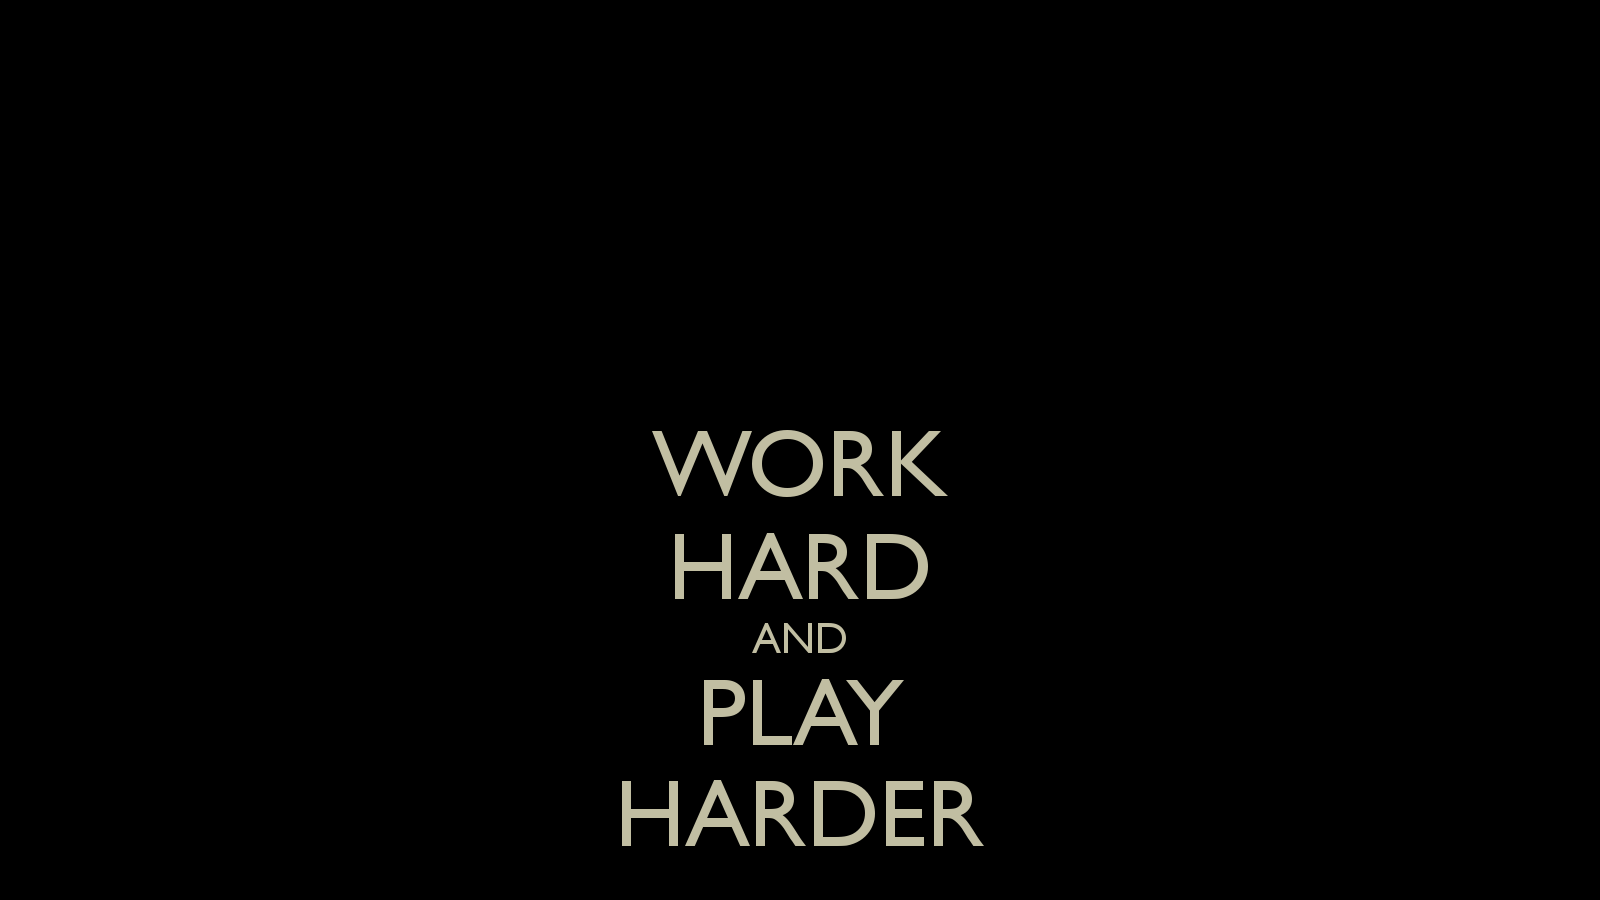 Free download WORK HARD AND PLAY HARDER KEEP CALM AND CARRY ON Image Generator [1600x900] for your Desktop, Mobile & Tablet. Explore Work Hard Play Hard Wallpaper